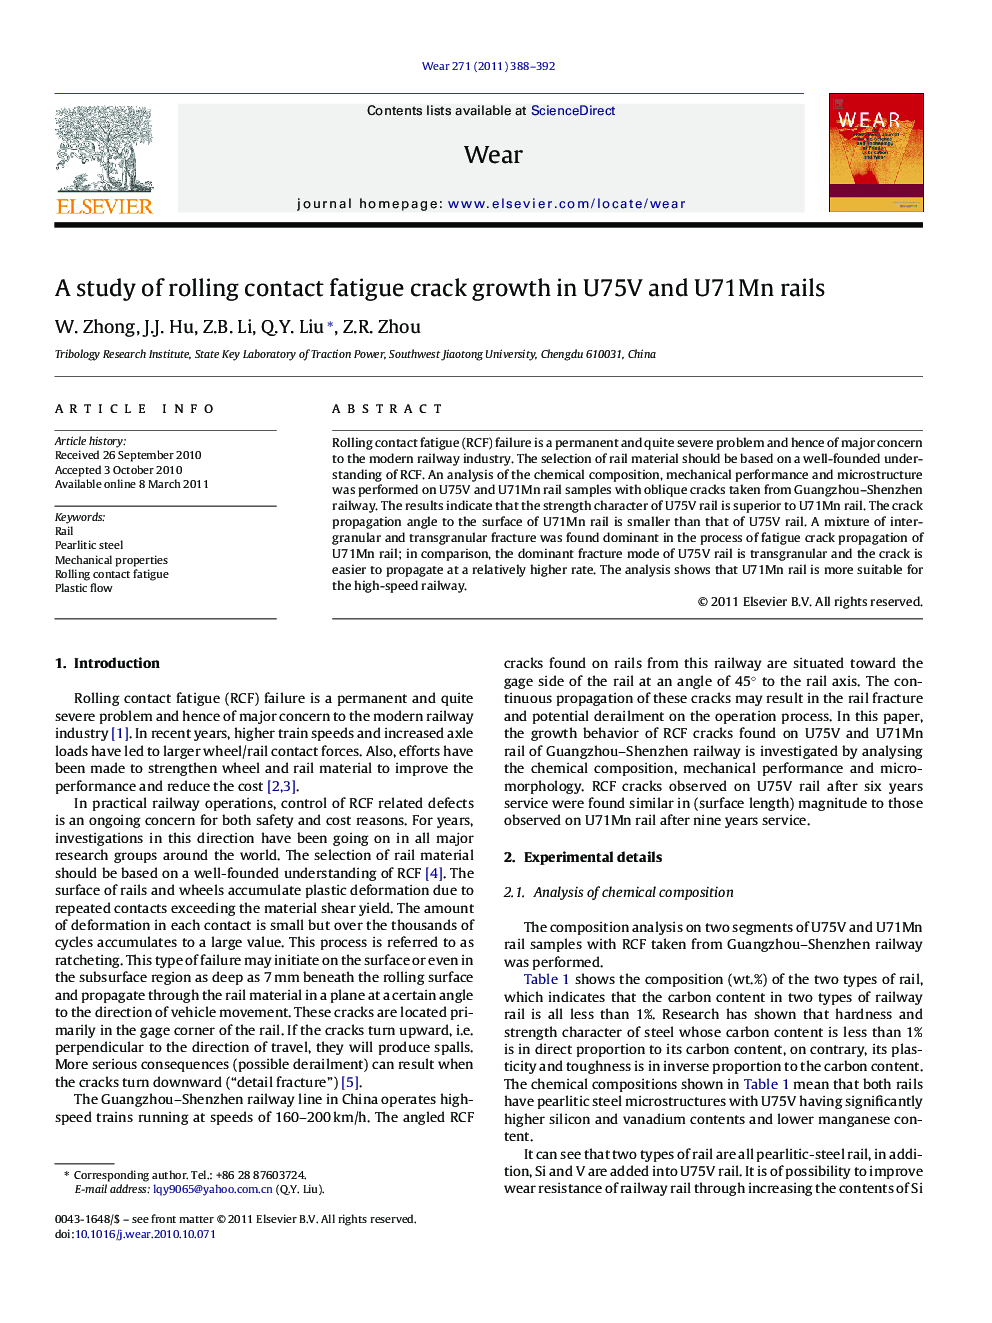 A study of rolling contact fatigue crack growth in U75V and U71Mn rails